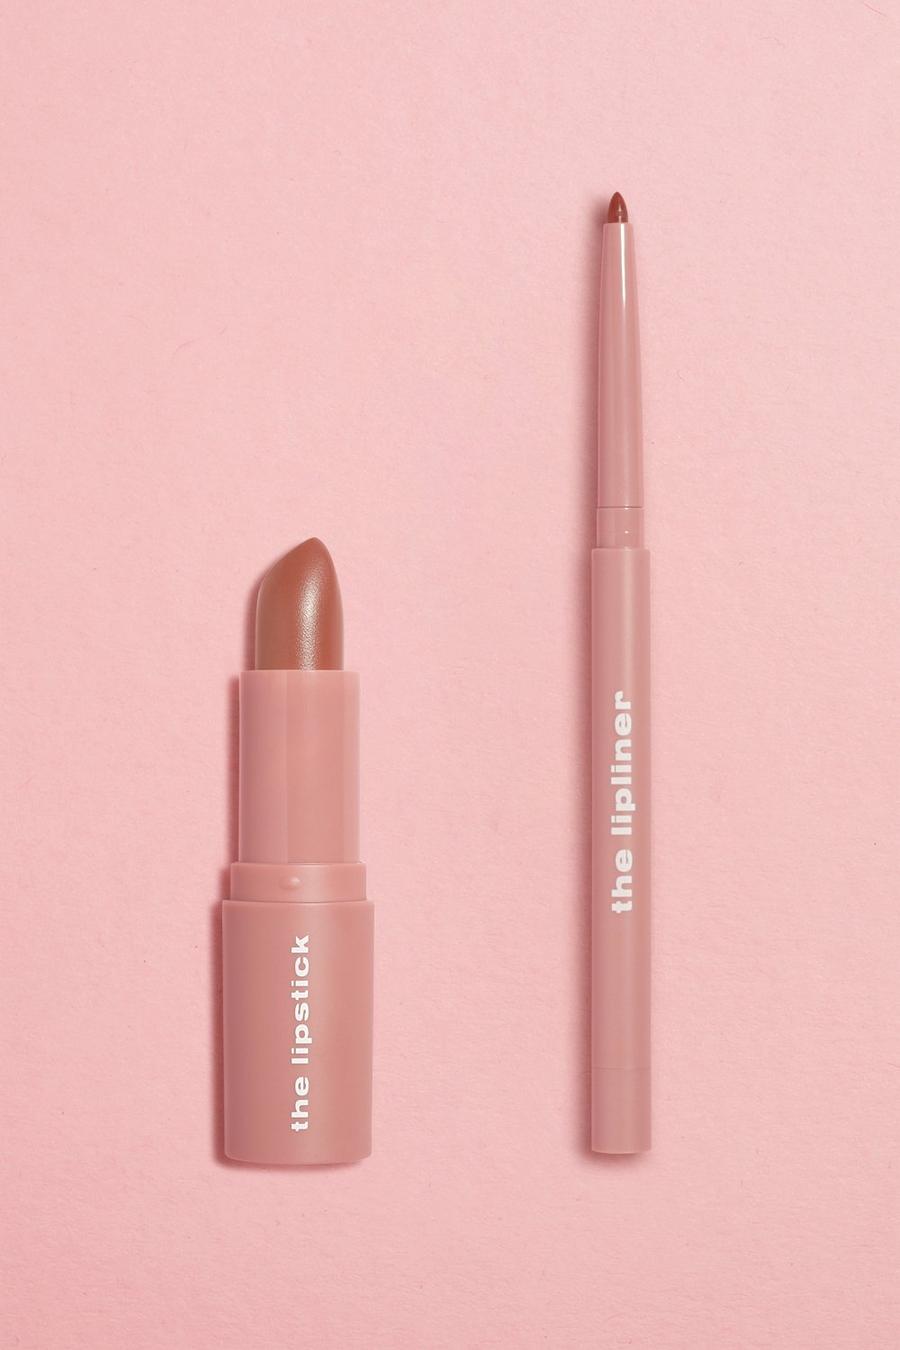 Boohoo Beauty Klassisches Lippenset - Pale Nude image number 1